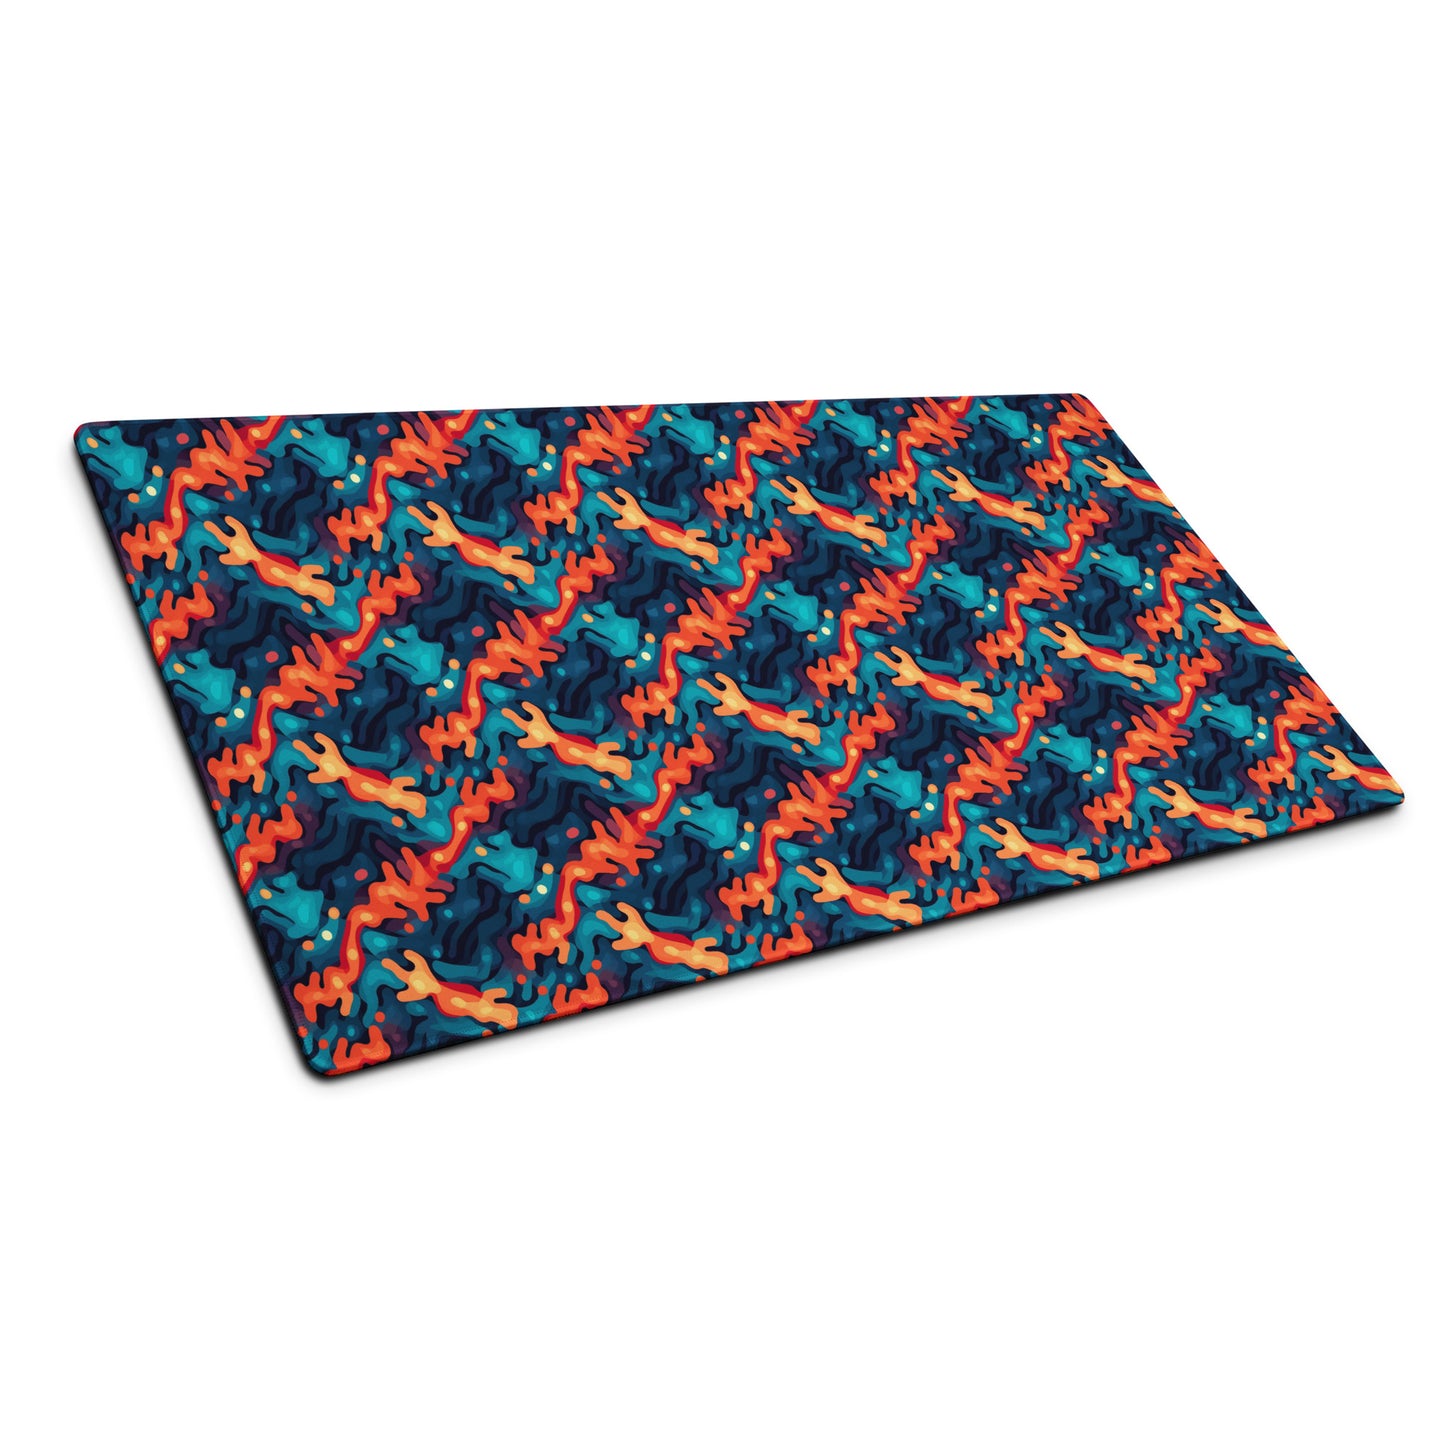 A 36" x 18" desk pad with a wavy woven pattern on it shown at an angle. Red and Blue in color.